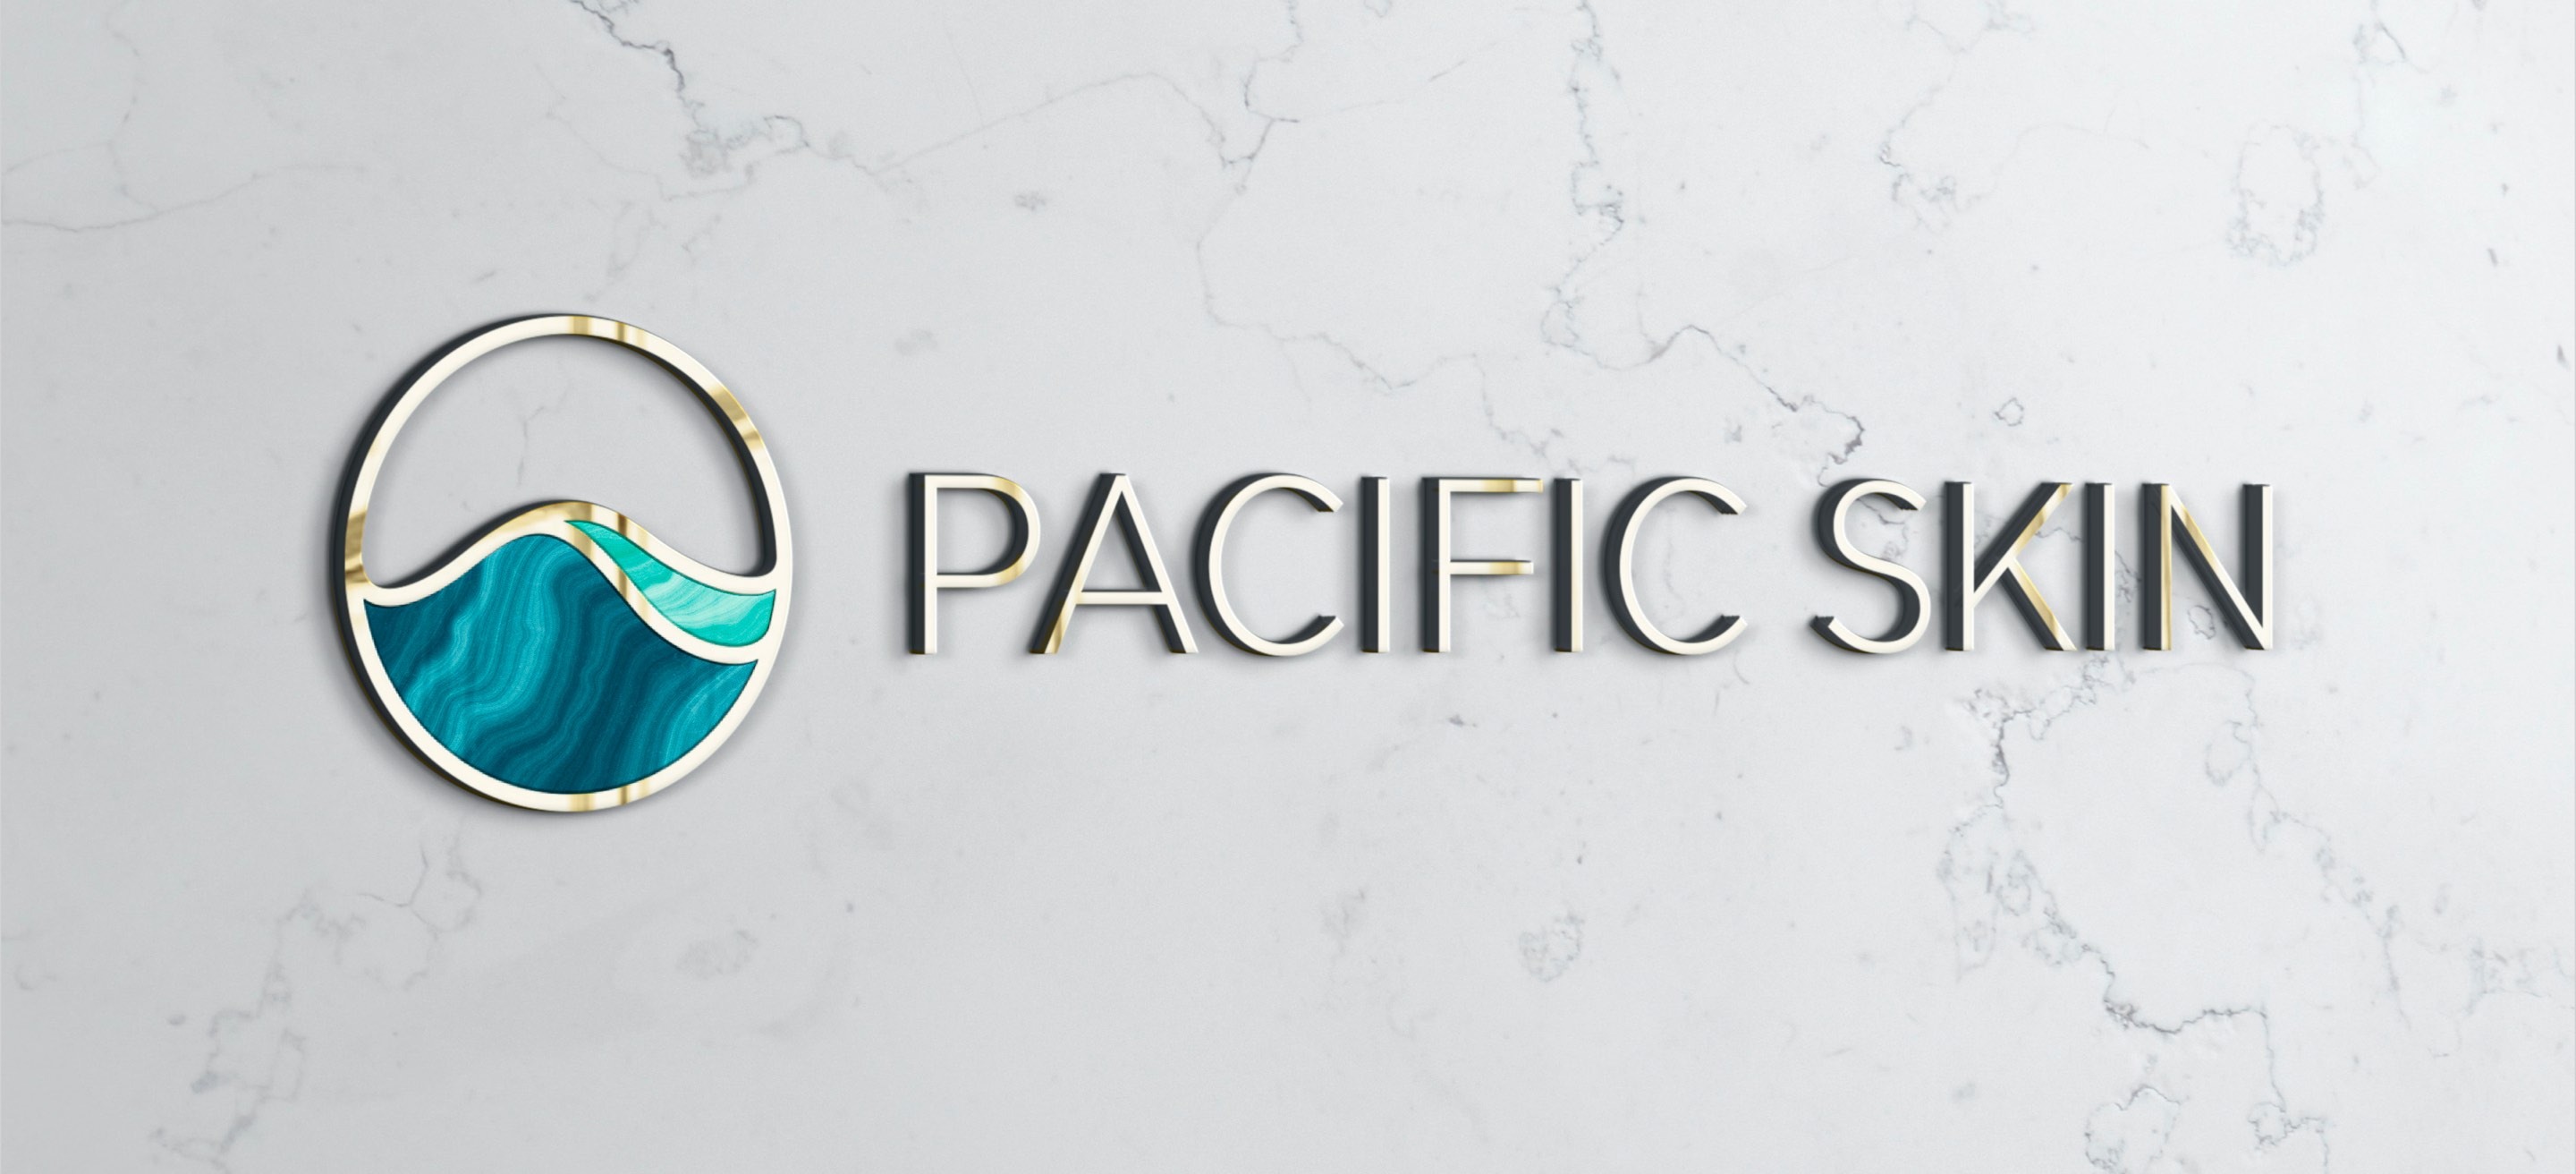 Pacific Skin Office Signage